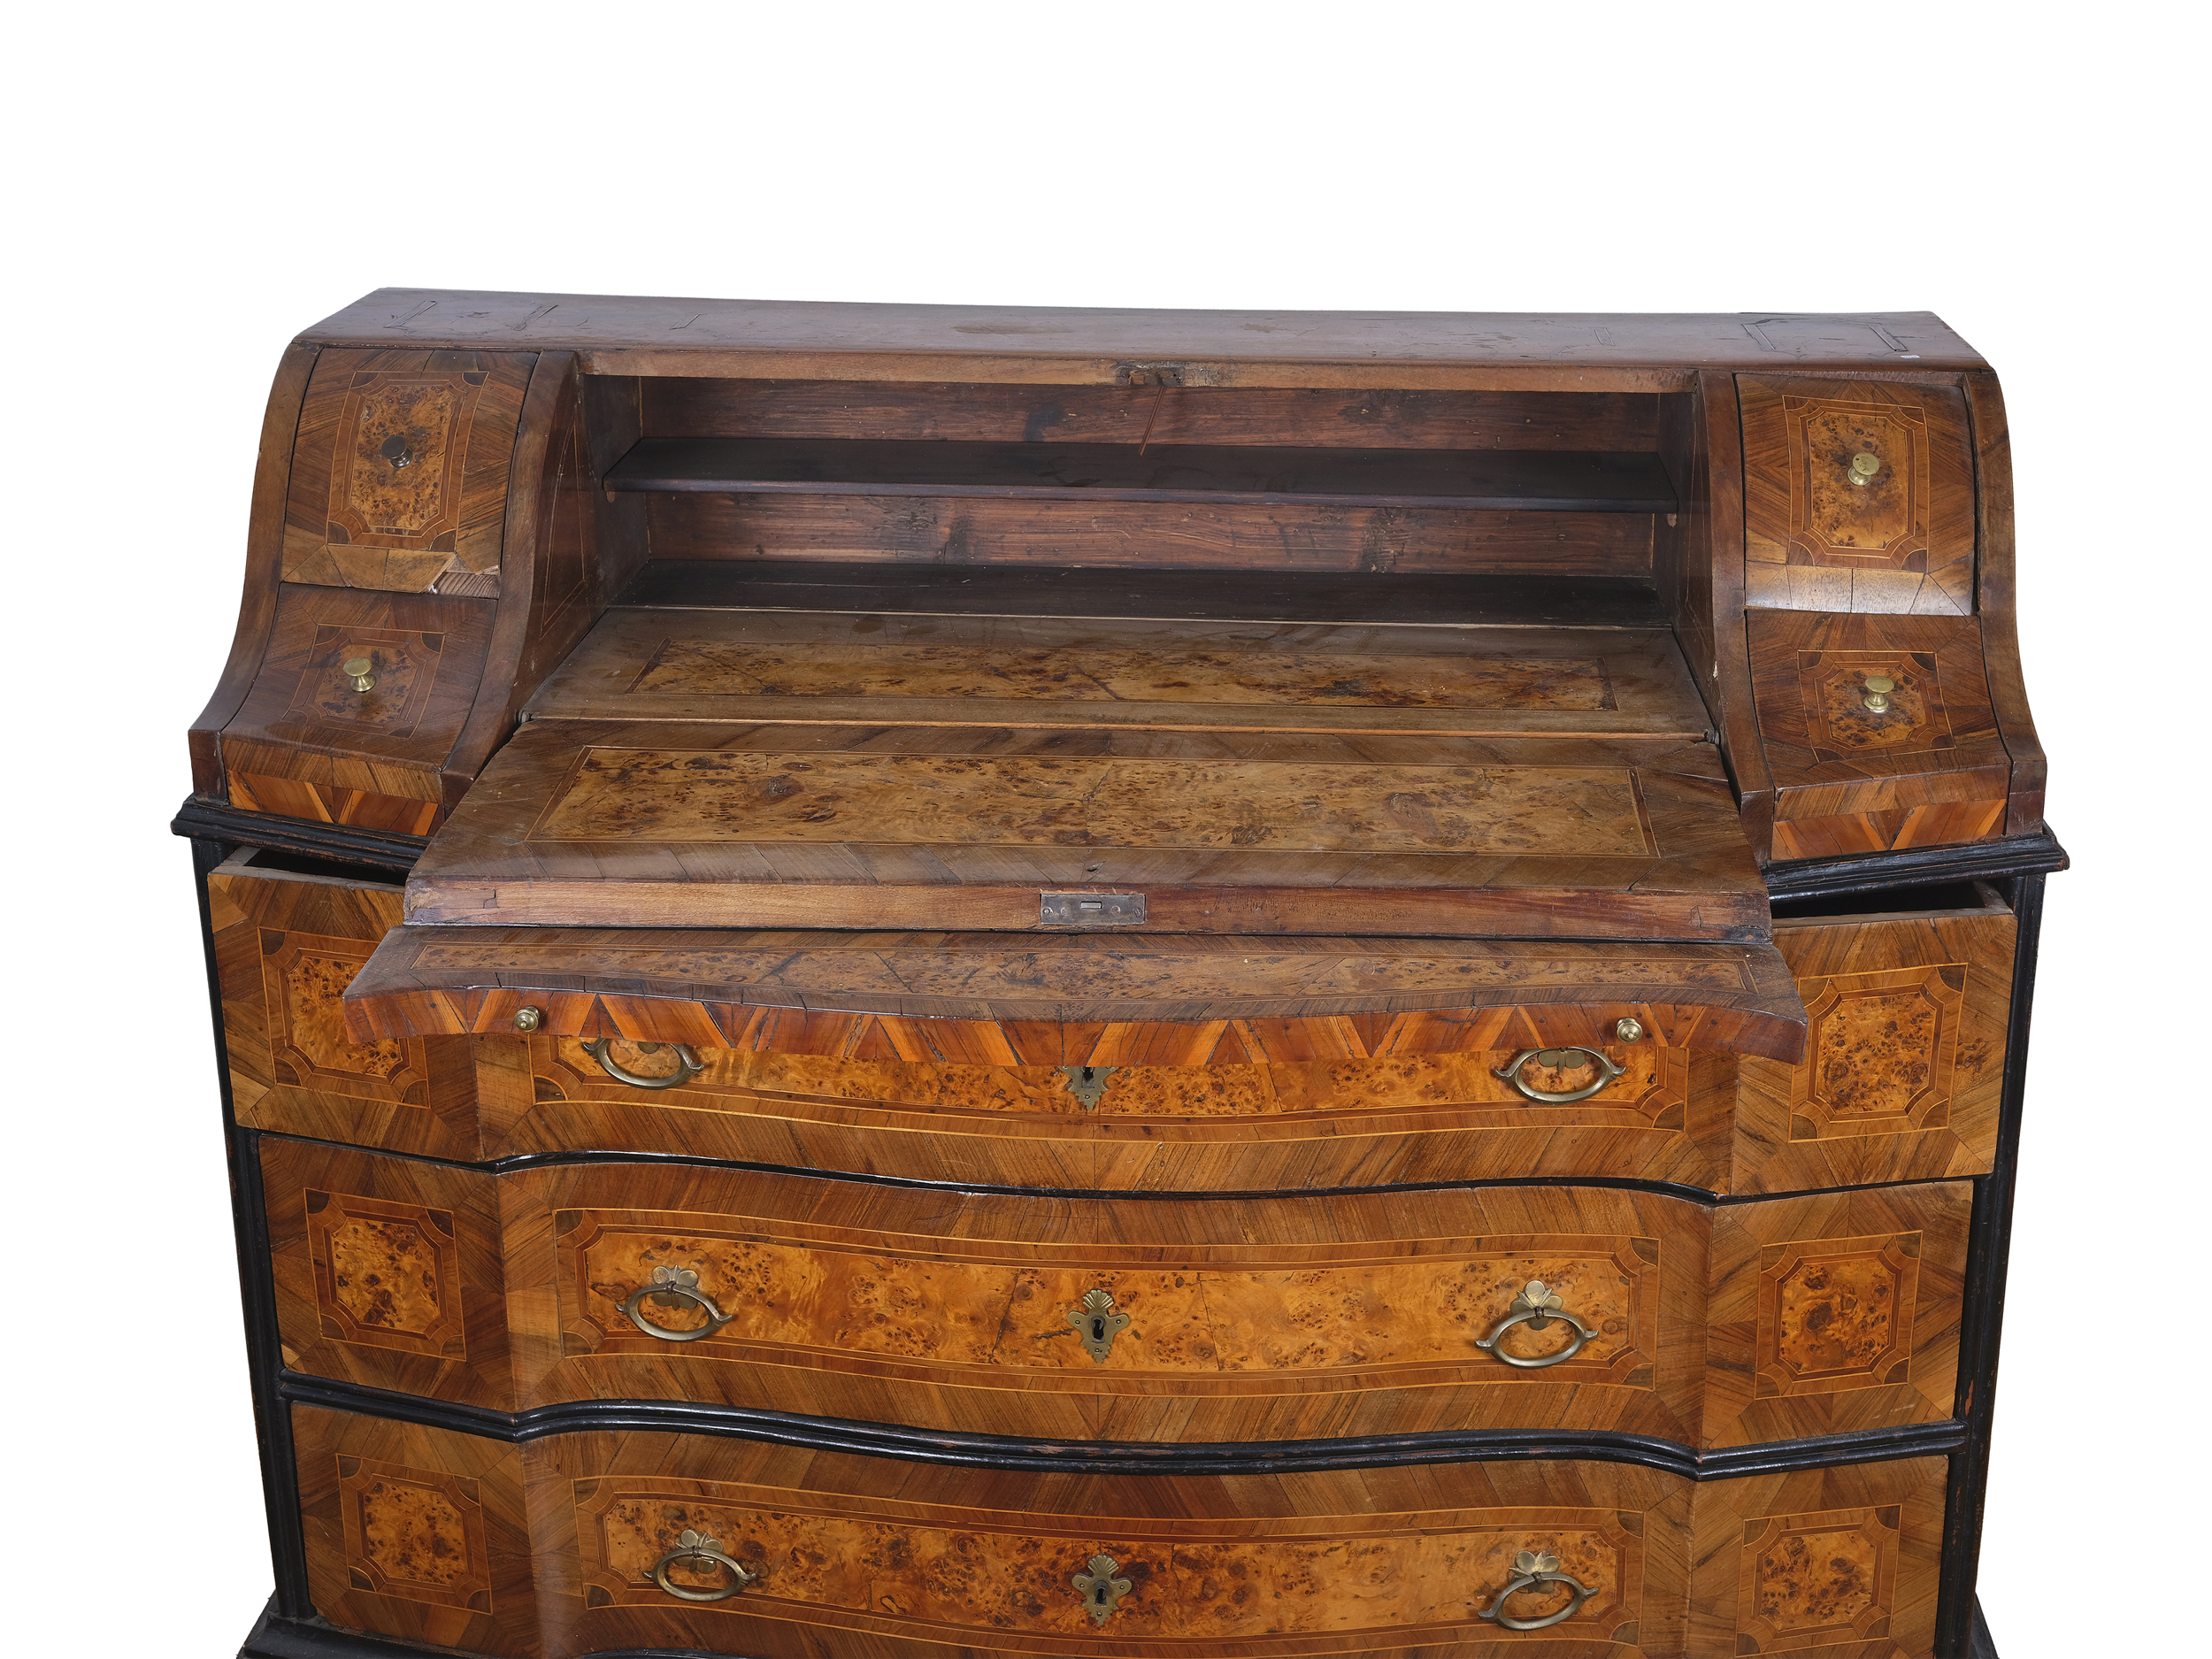 Writing chest, Italy, mid 18th century - Image 5 of 7